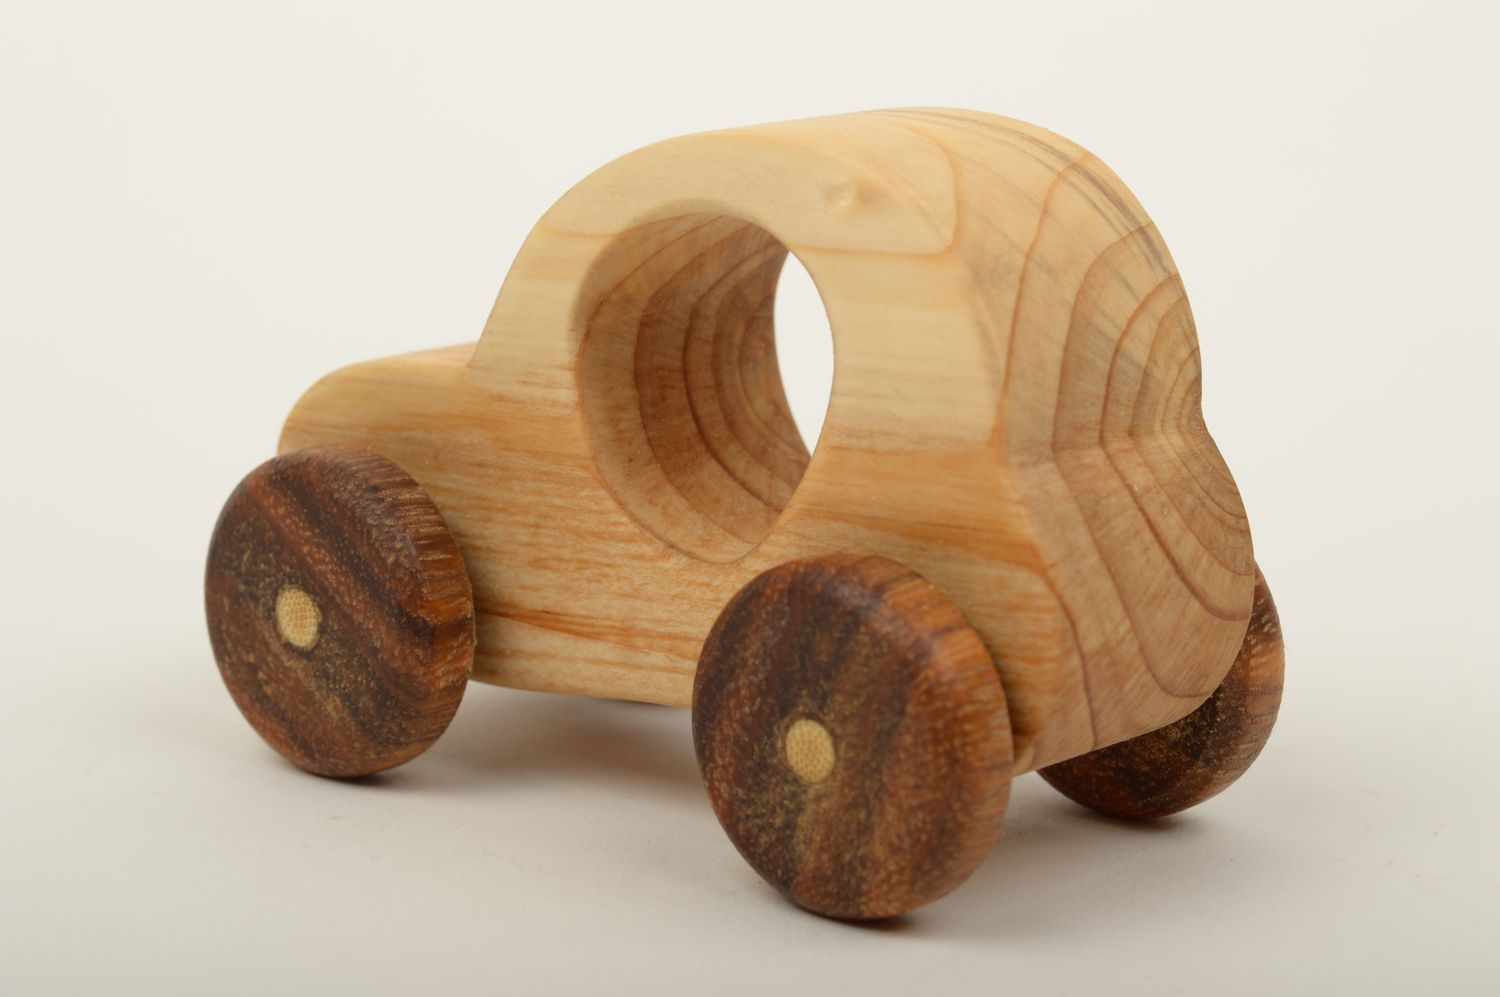 Handmade wooden toy wheeled car toy birthday gift ideas gifts for kids photo 2